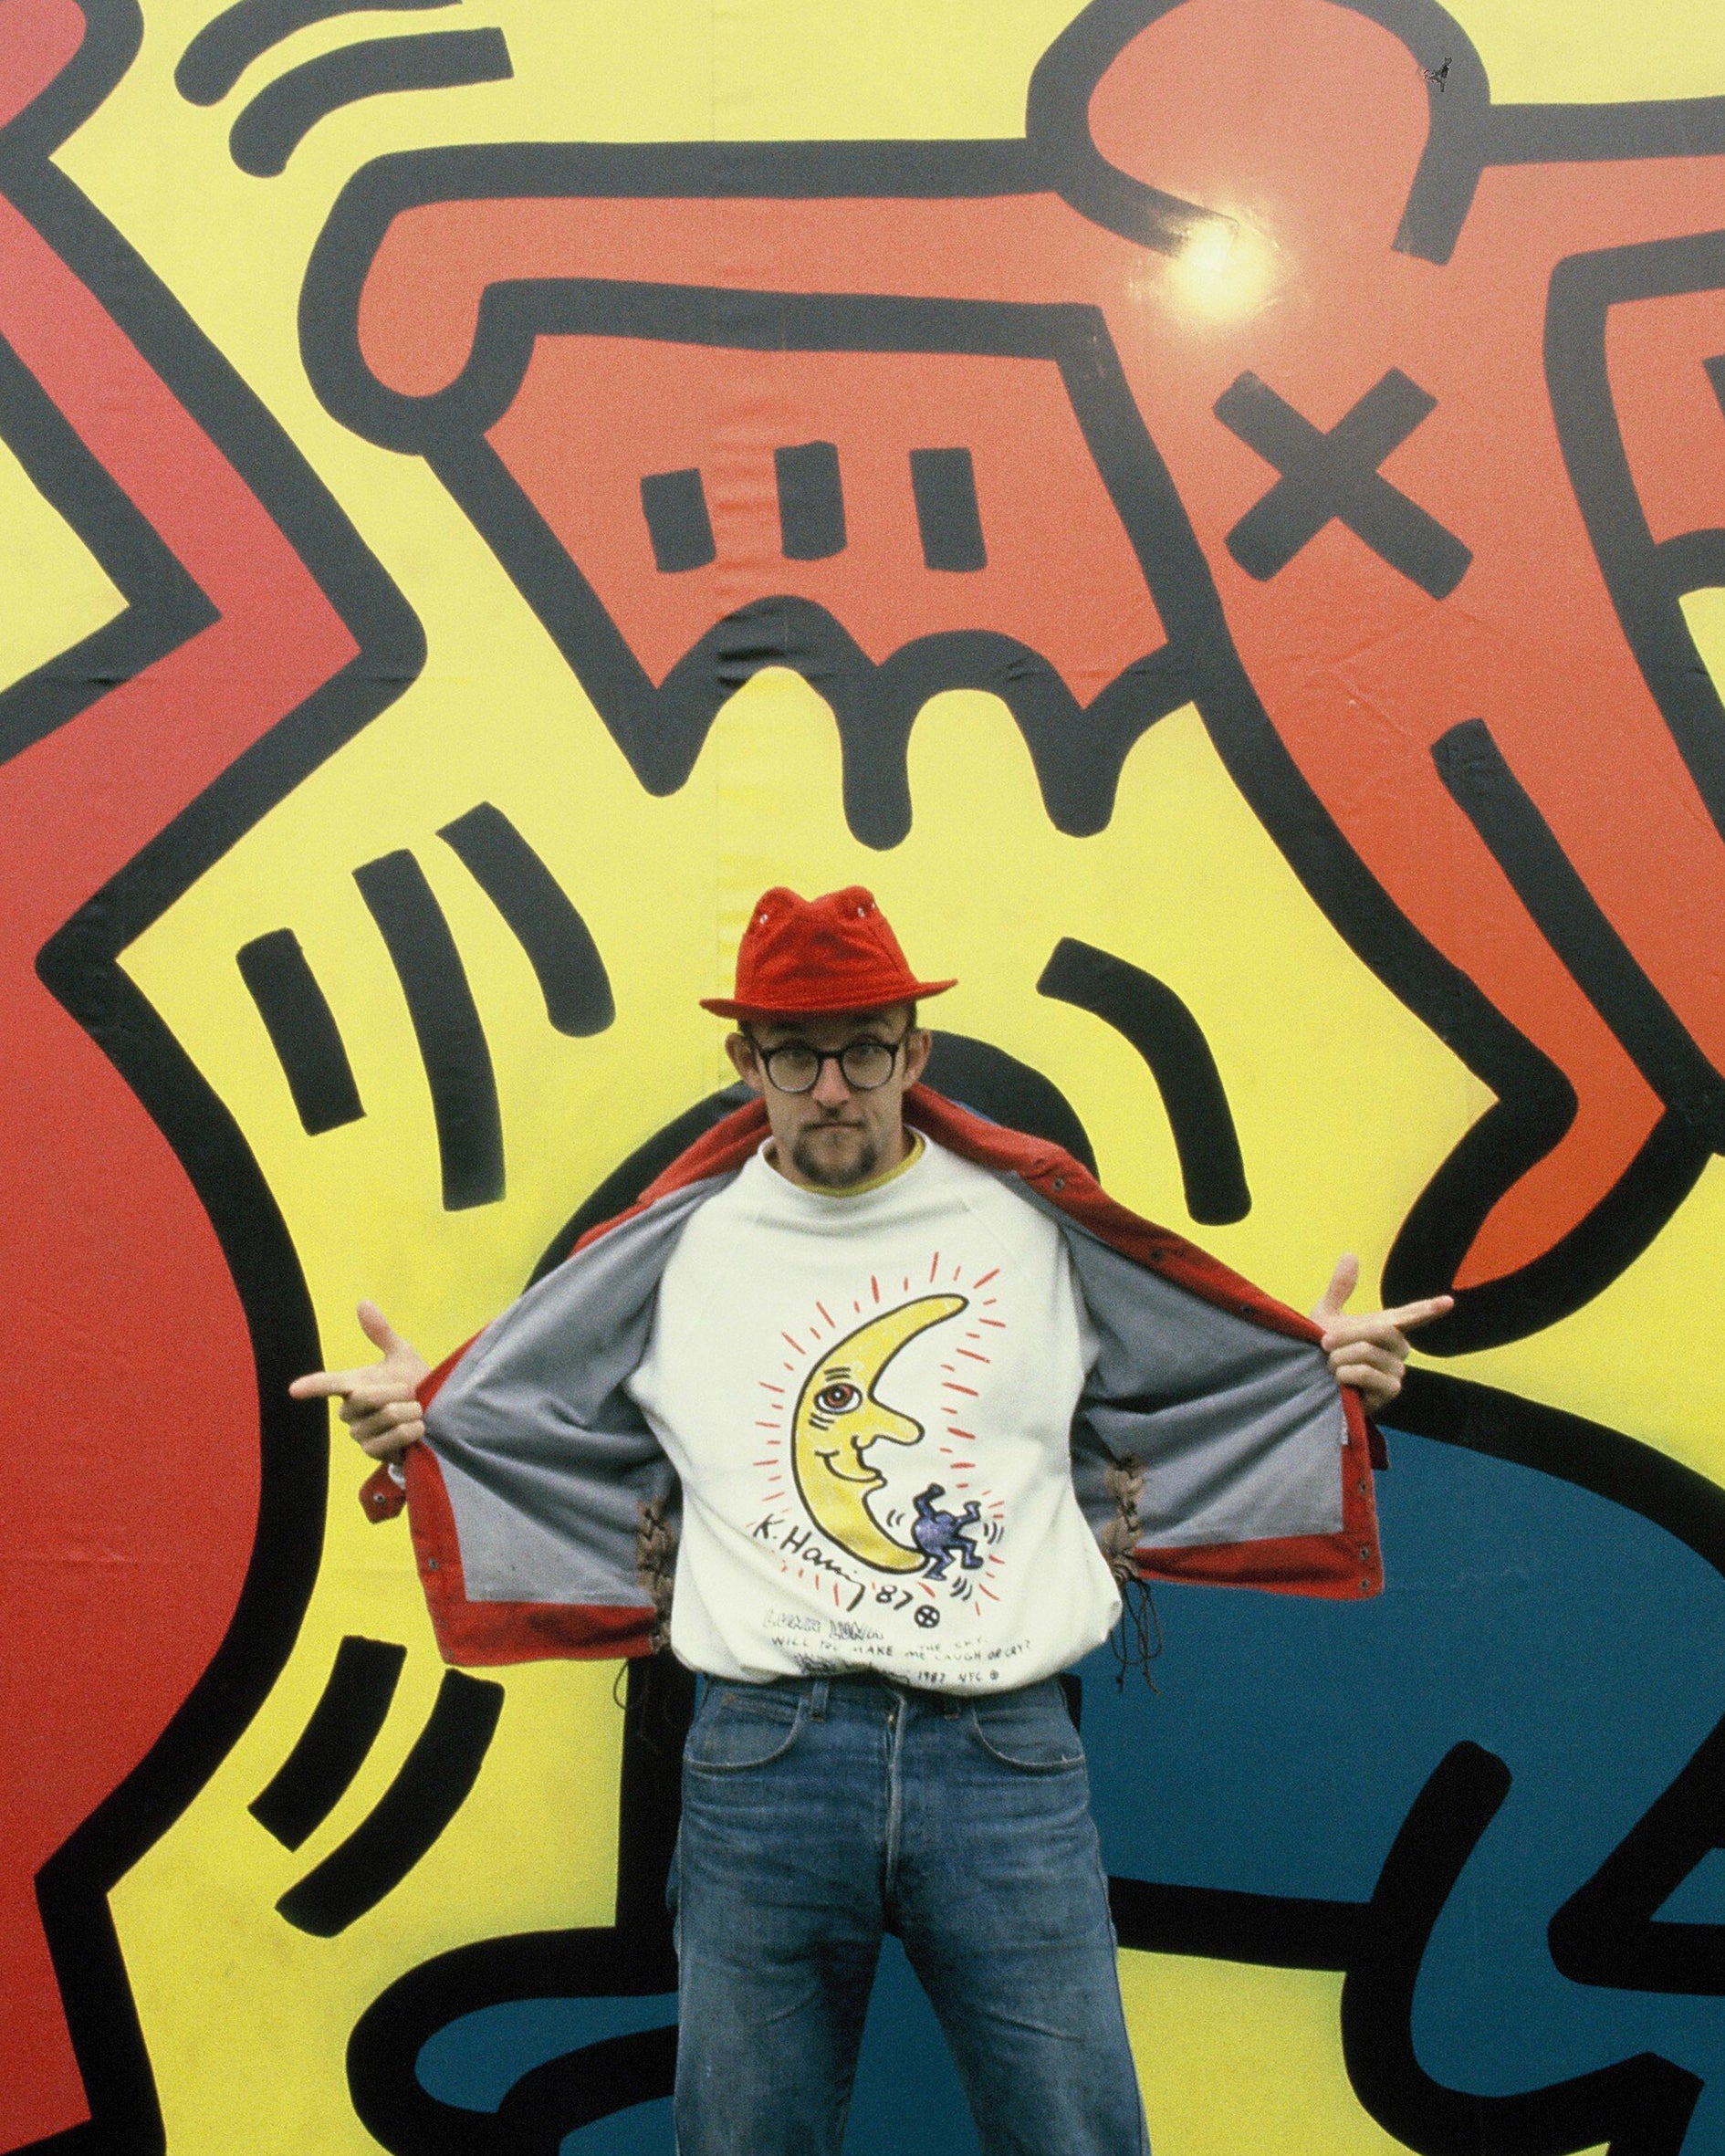 Archive photograph of Keith Haring wearing the Archival Keith Haring Crewneck